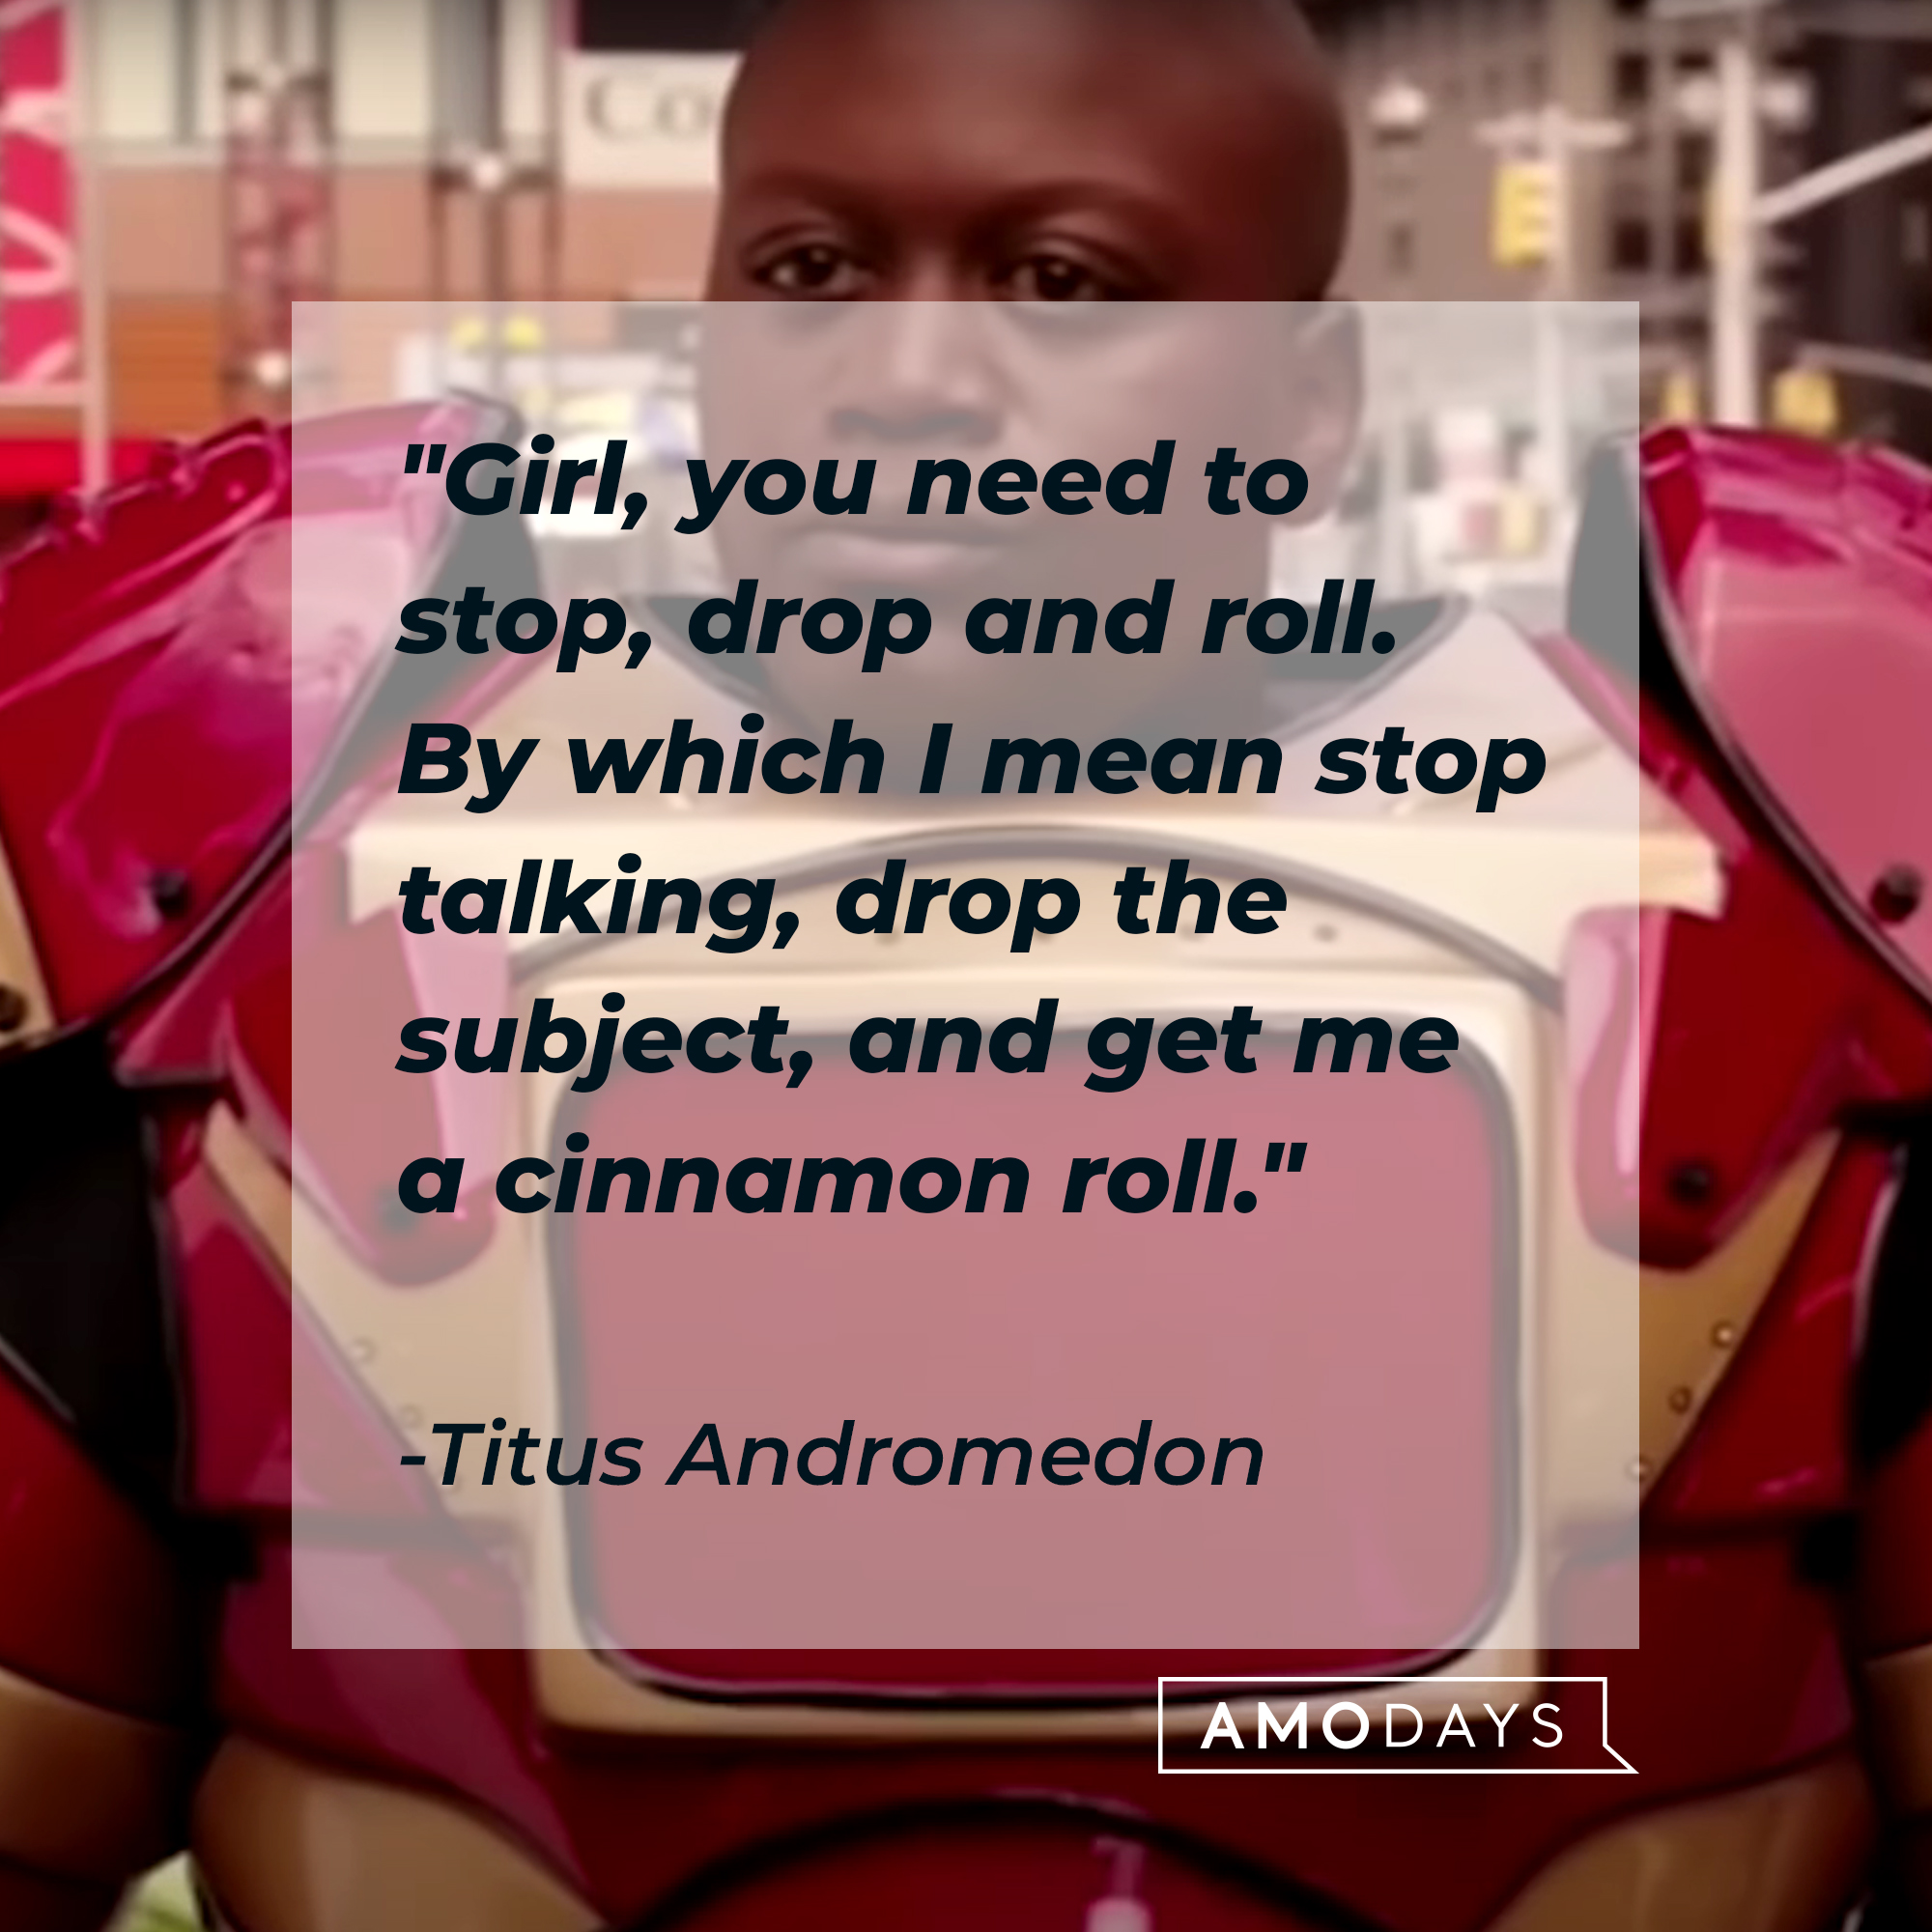 A photo of Titus Andromedon with the quote, "Girl, you need to stop, drop and roll. By which I mean stop talking, drop the subject, and get me a cinnamon roll." | Source: YouTube/Netflix